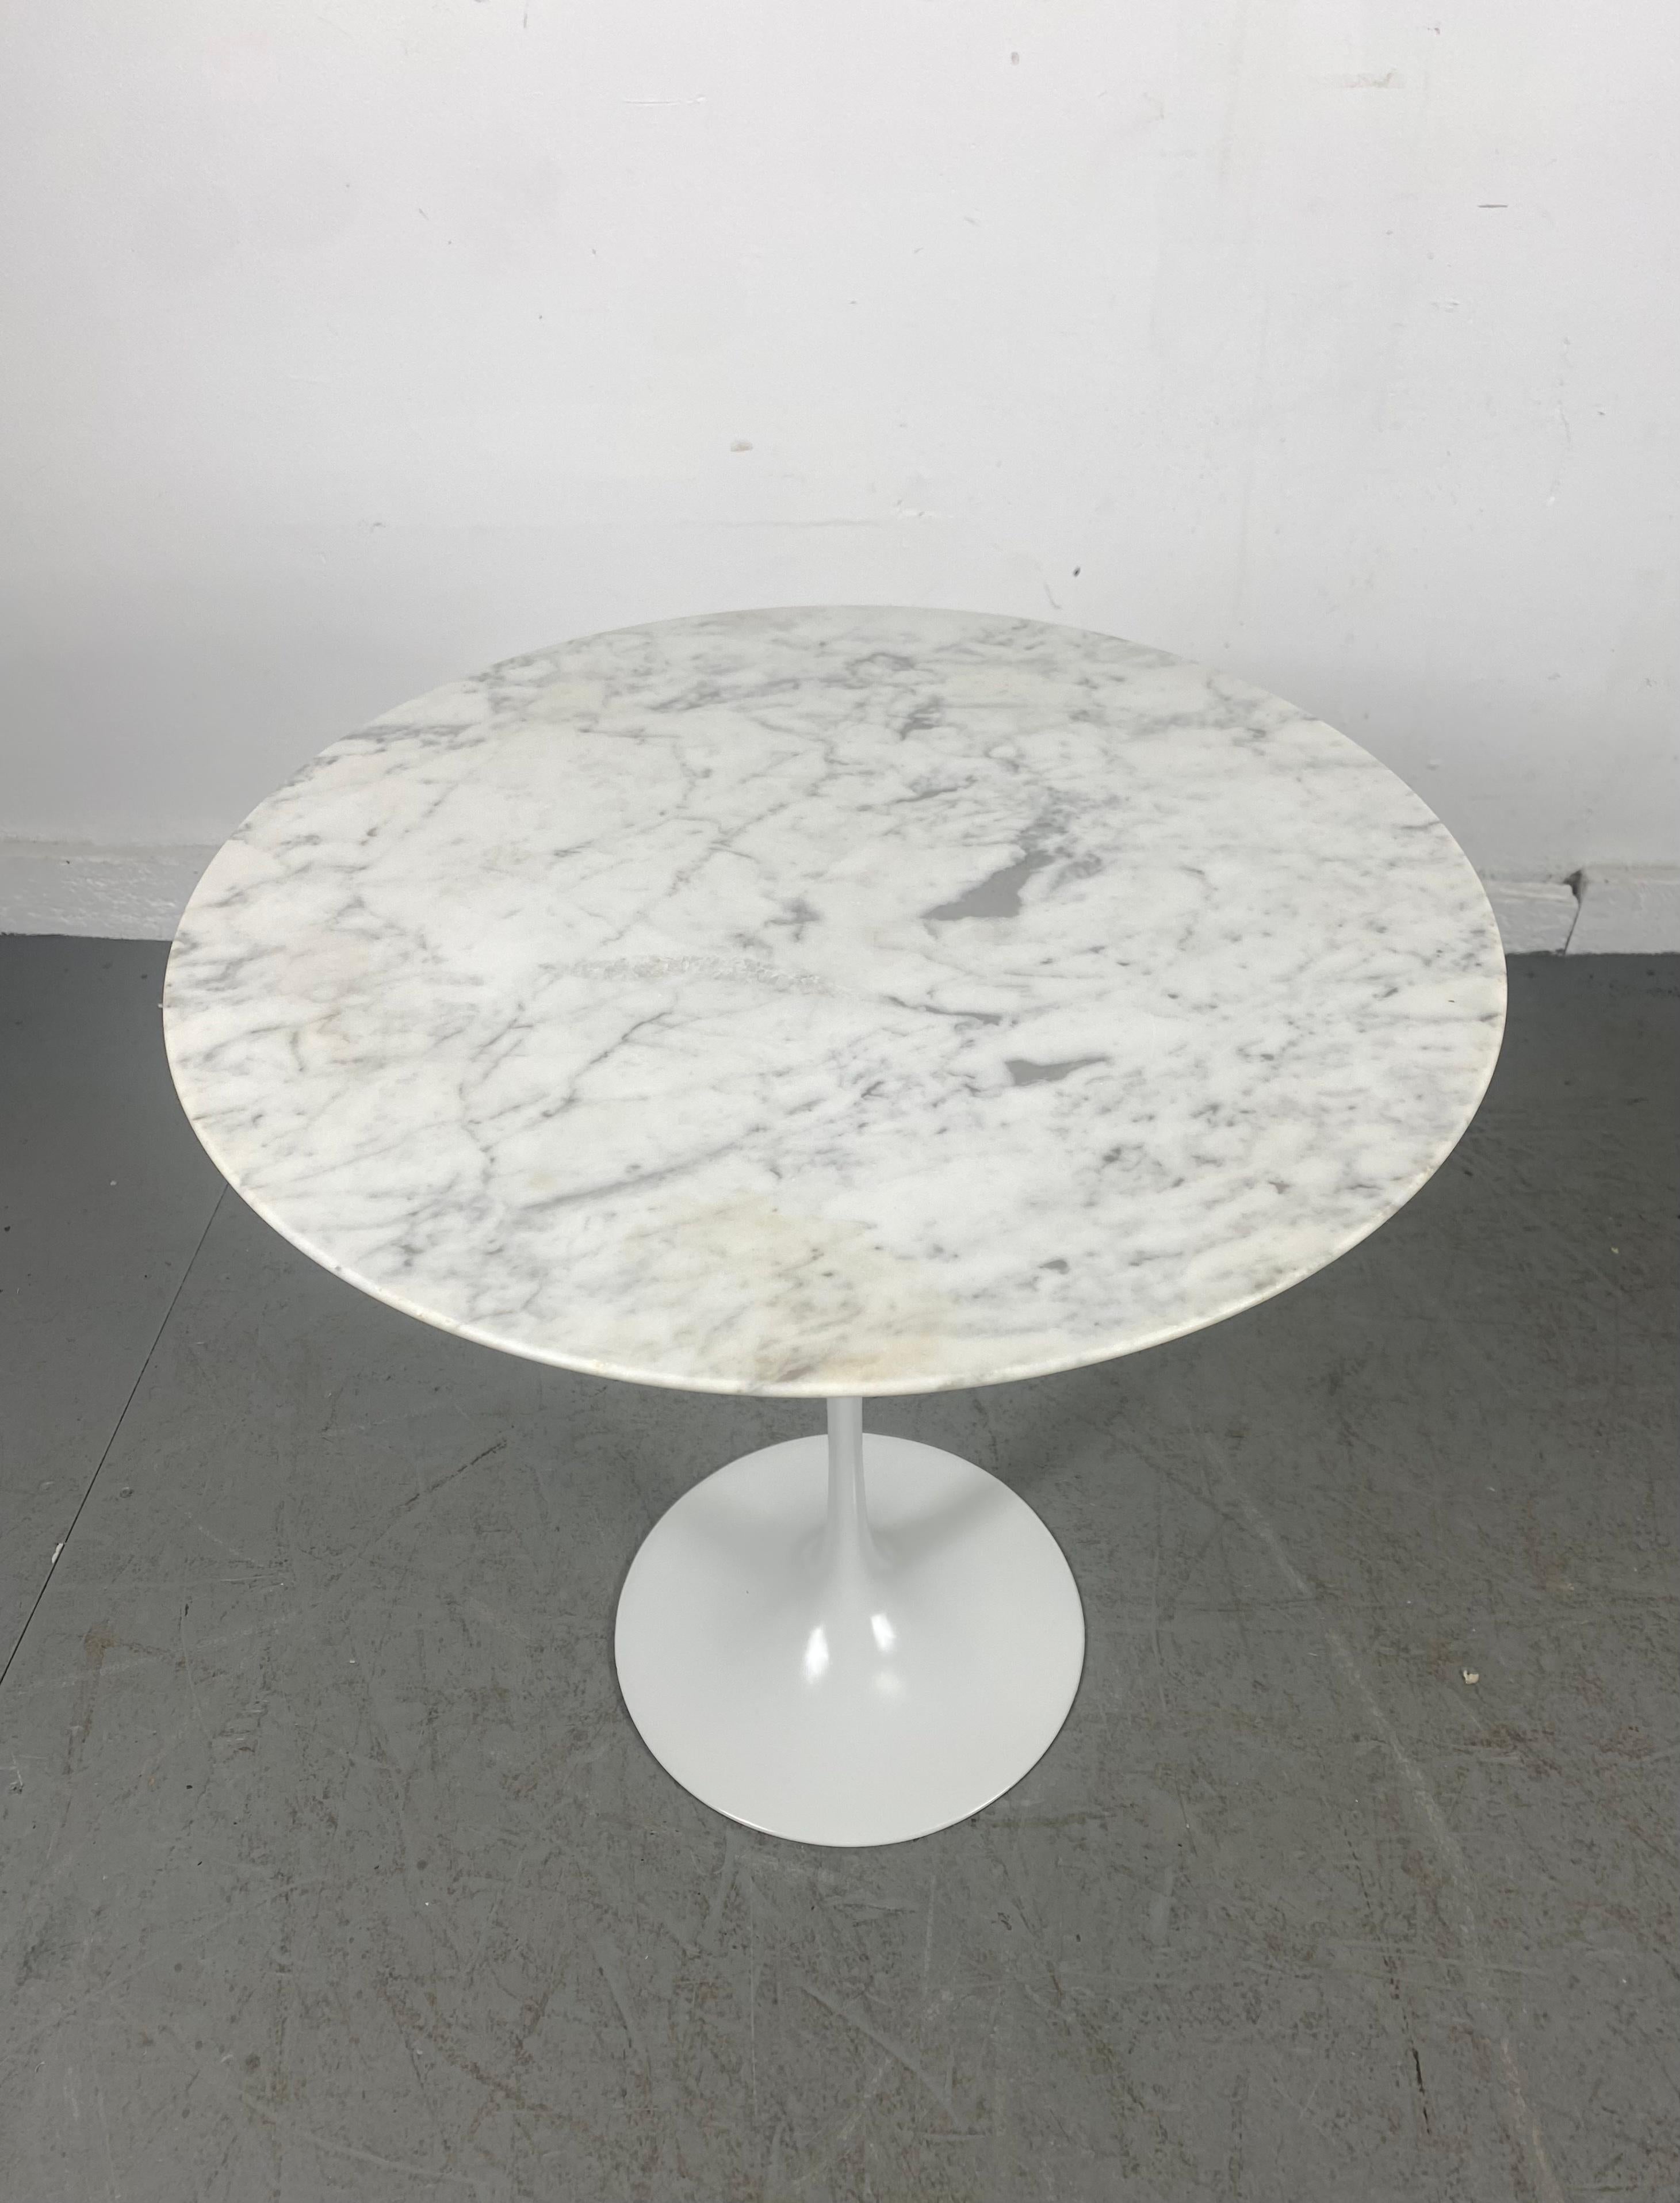 Classic Mid-Century Modern marble to tulip side table designed by Eero Saarinen for Knoll. Beautiful white Carrara marble, minor discoloration (see photo) Retains original early Knoll label.
 